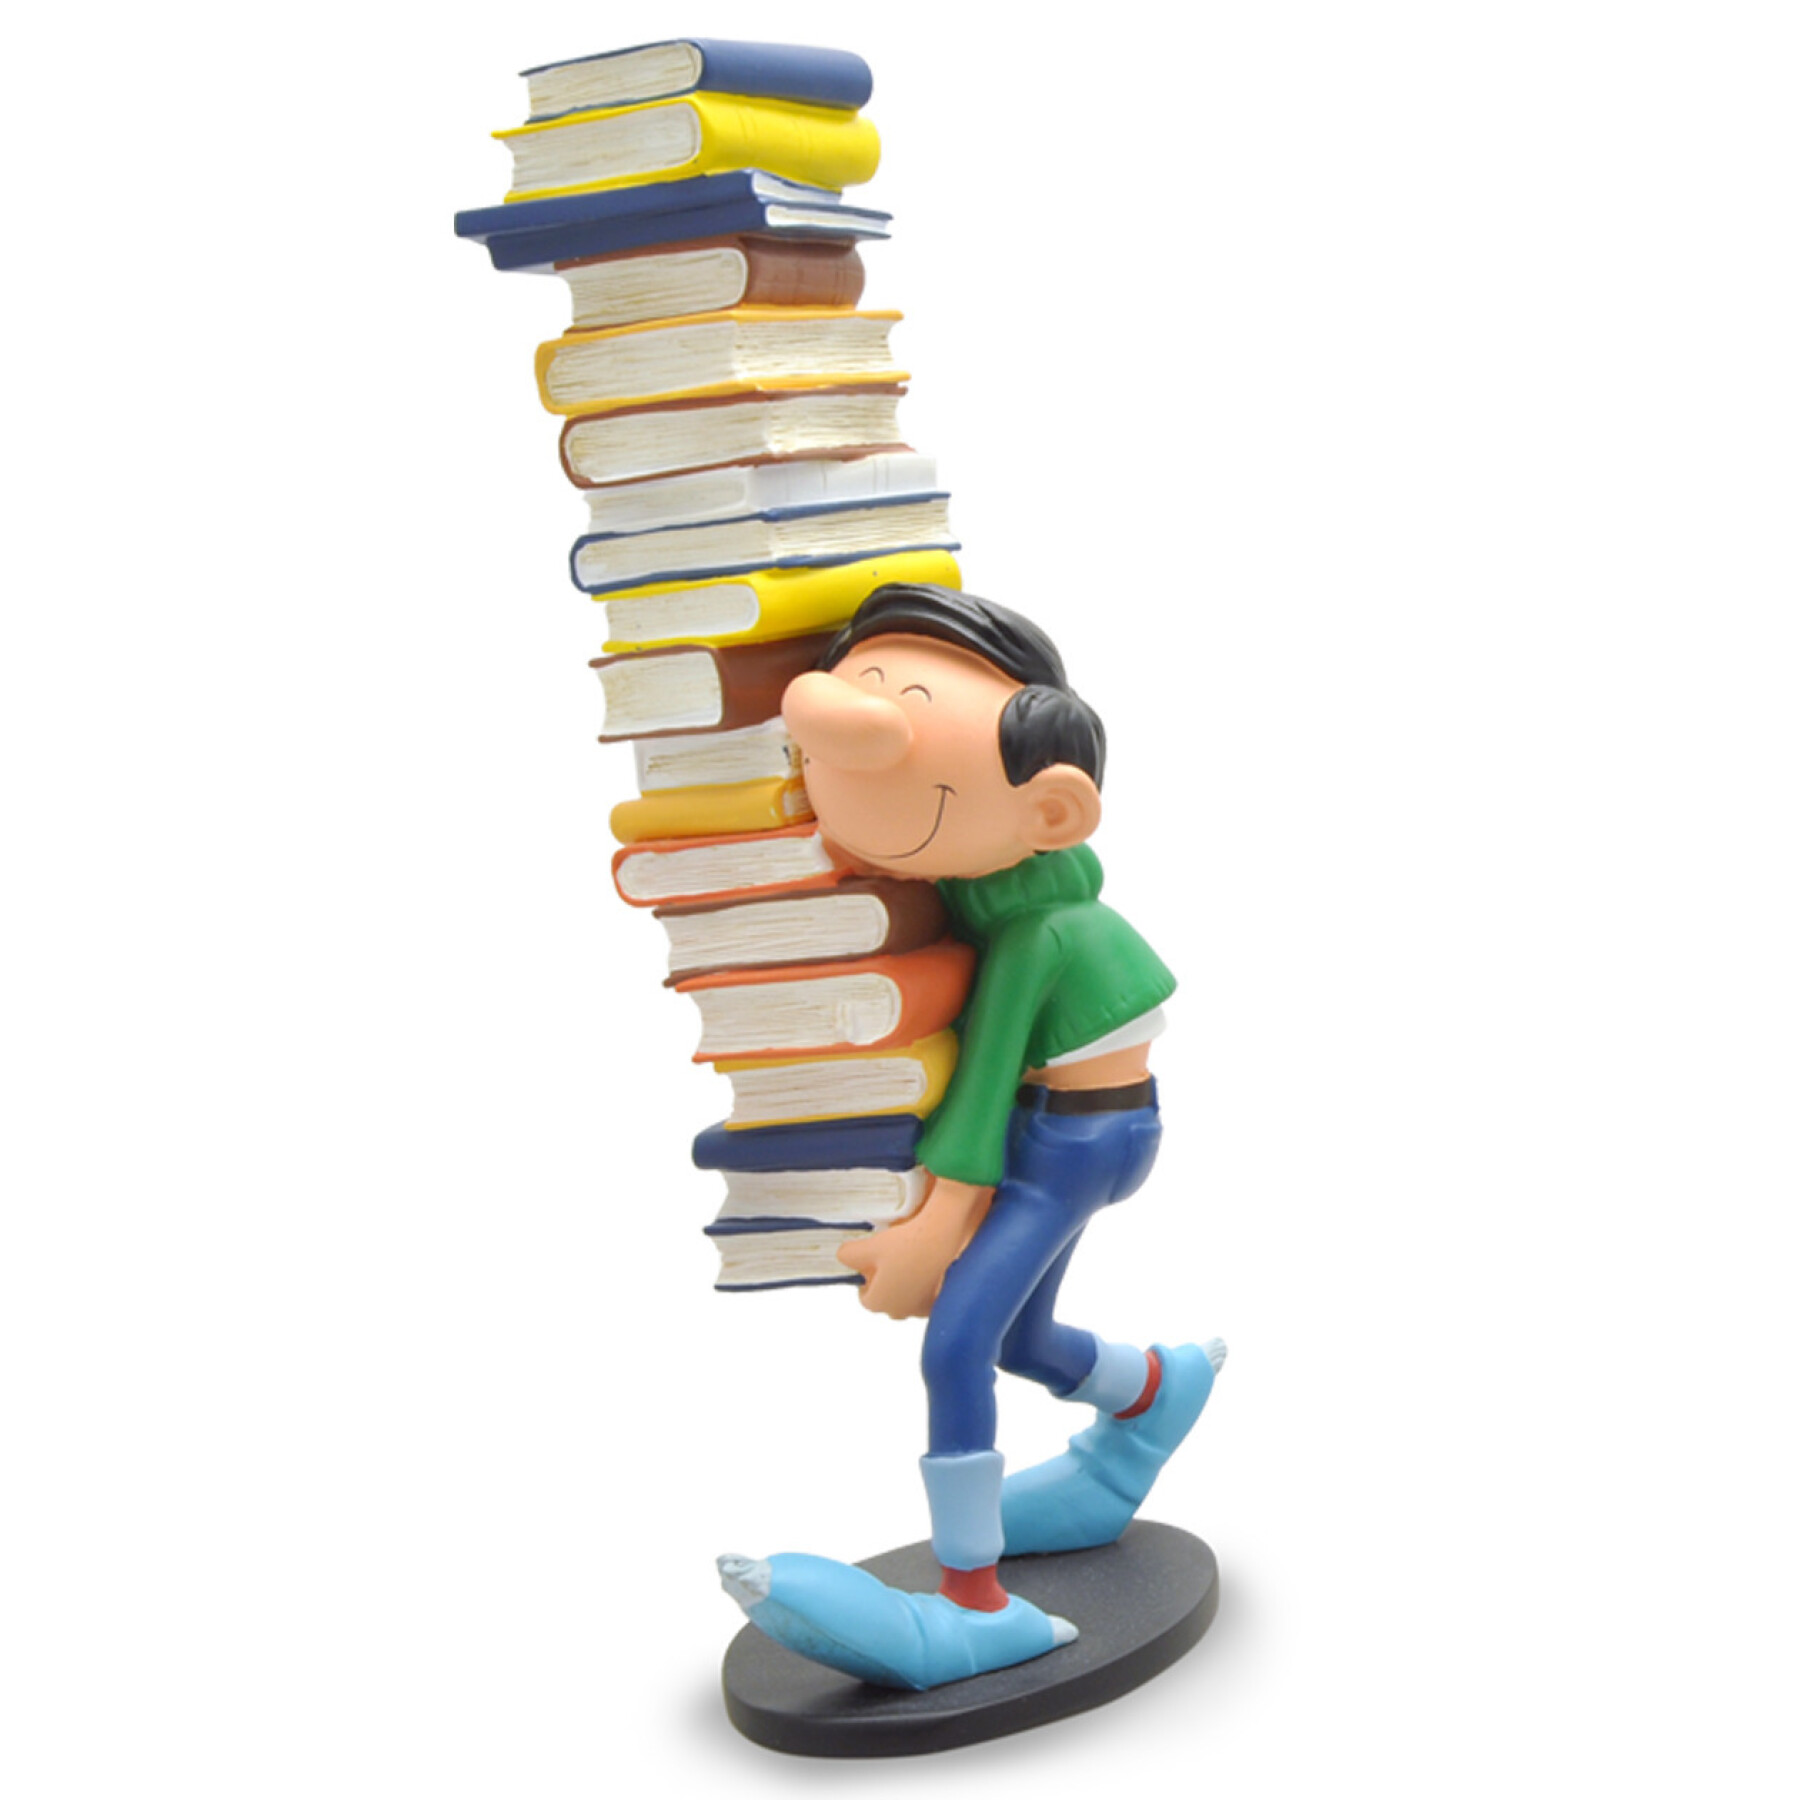 Gaston figure carrying a stack of books Plastoy